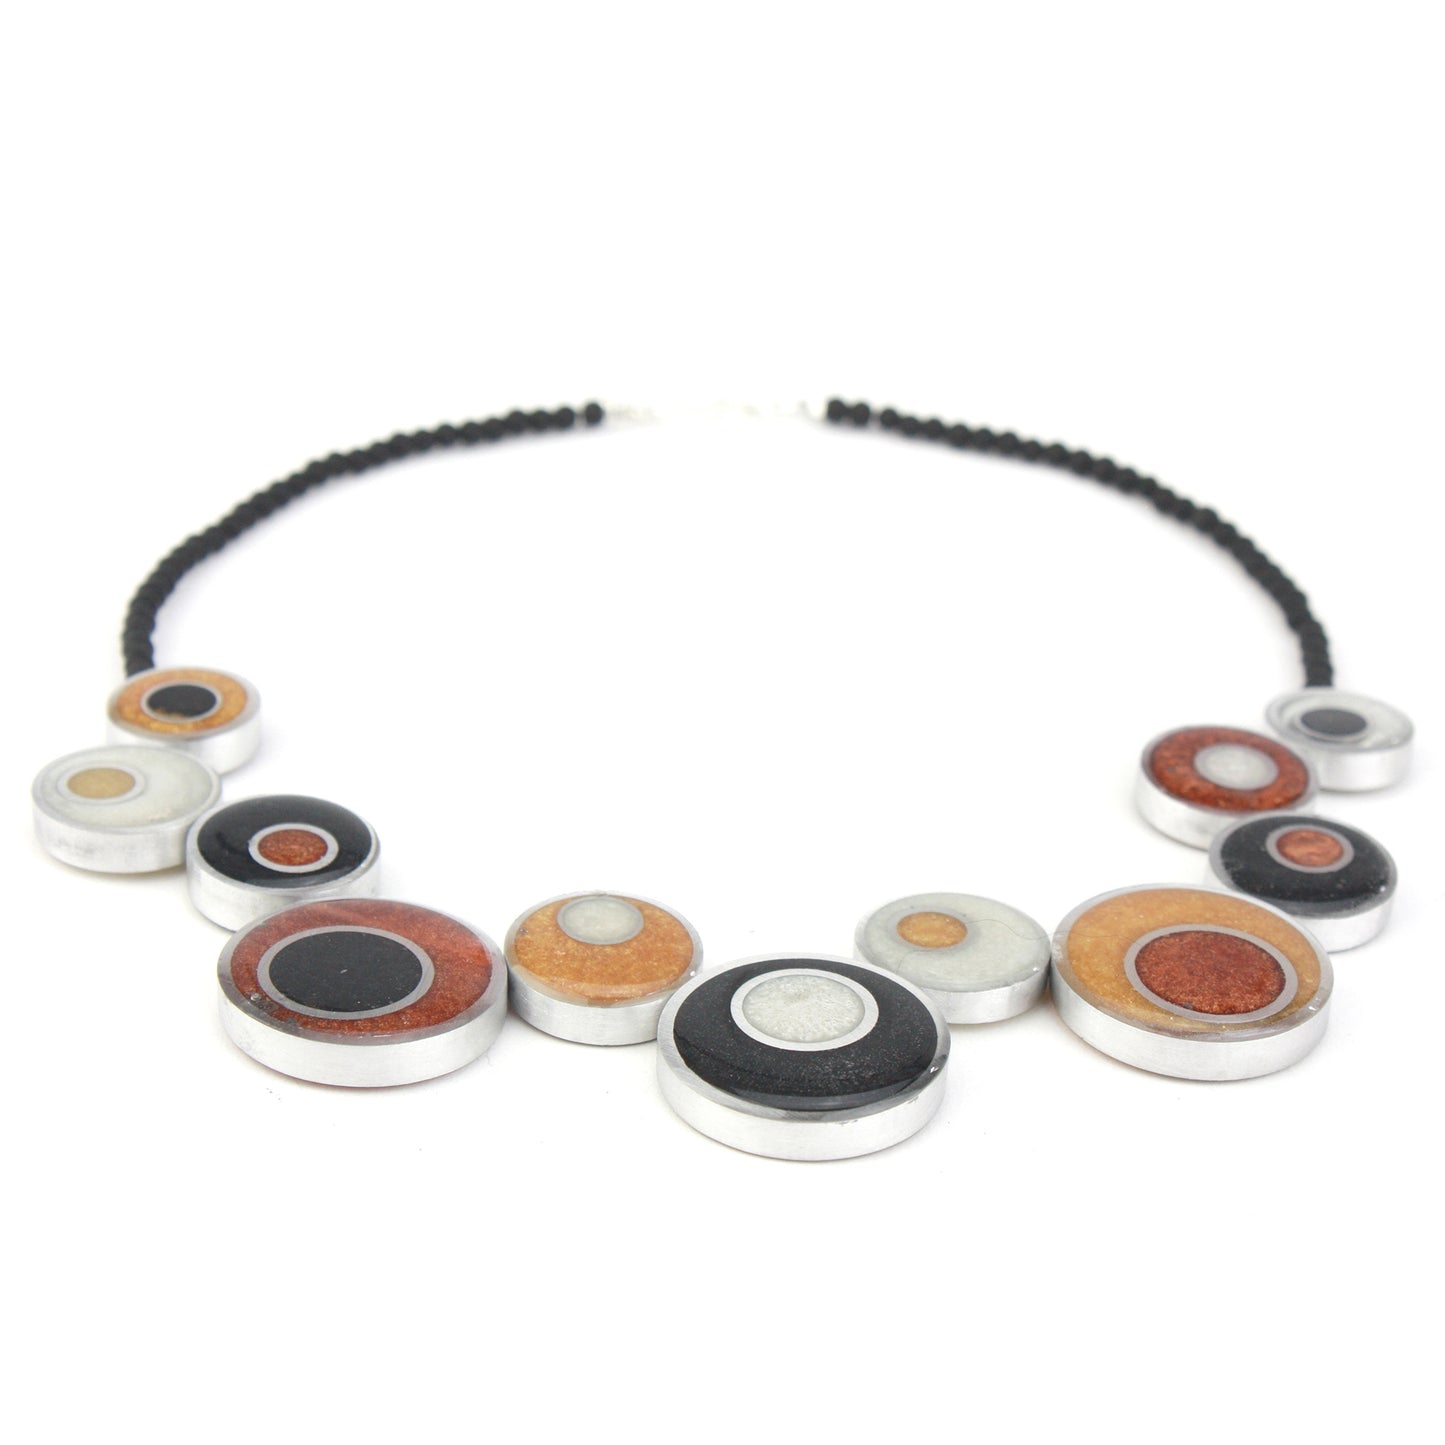 Resinique offset circle necklace - Black, white, copper and gold